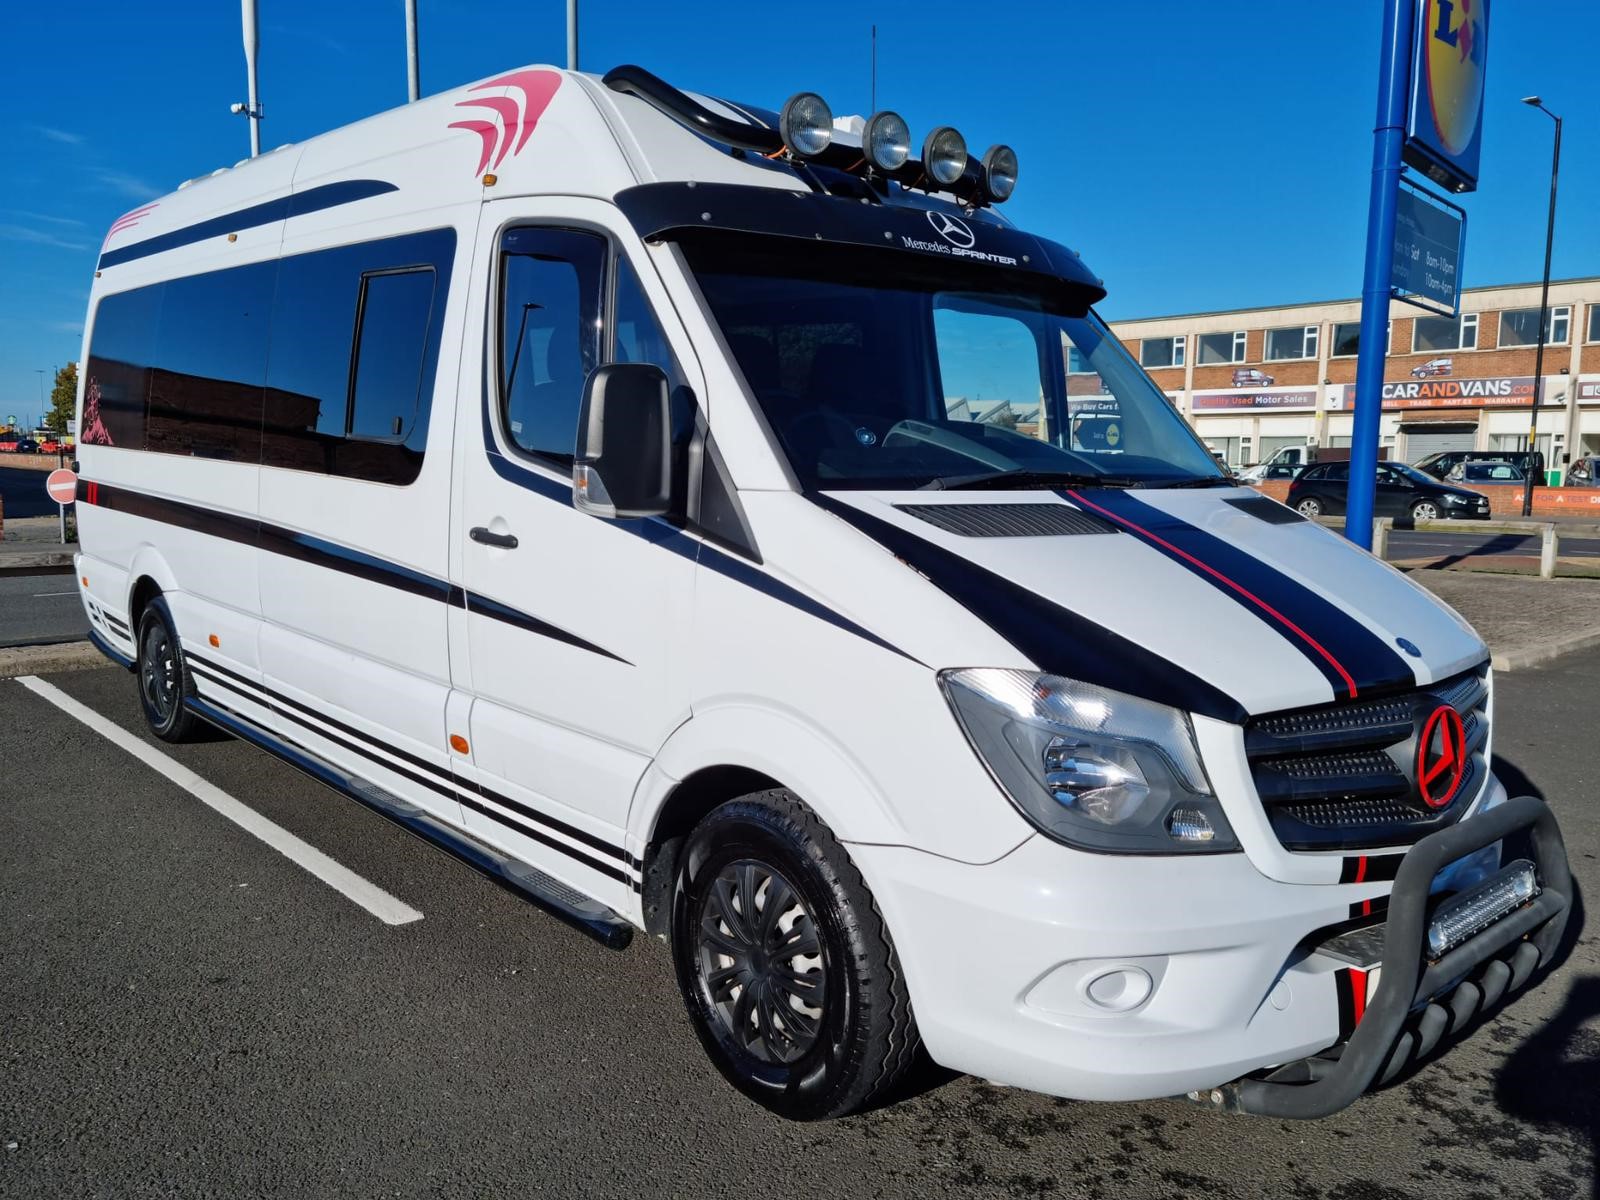 Used Mercedes Sprinter for sale in Middlesbrough, Teesside